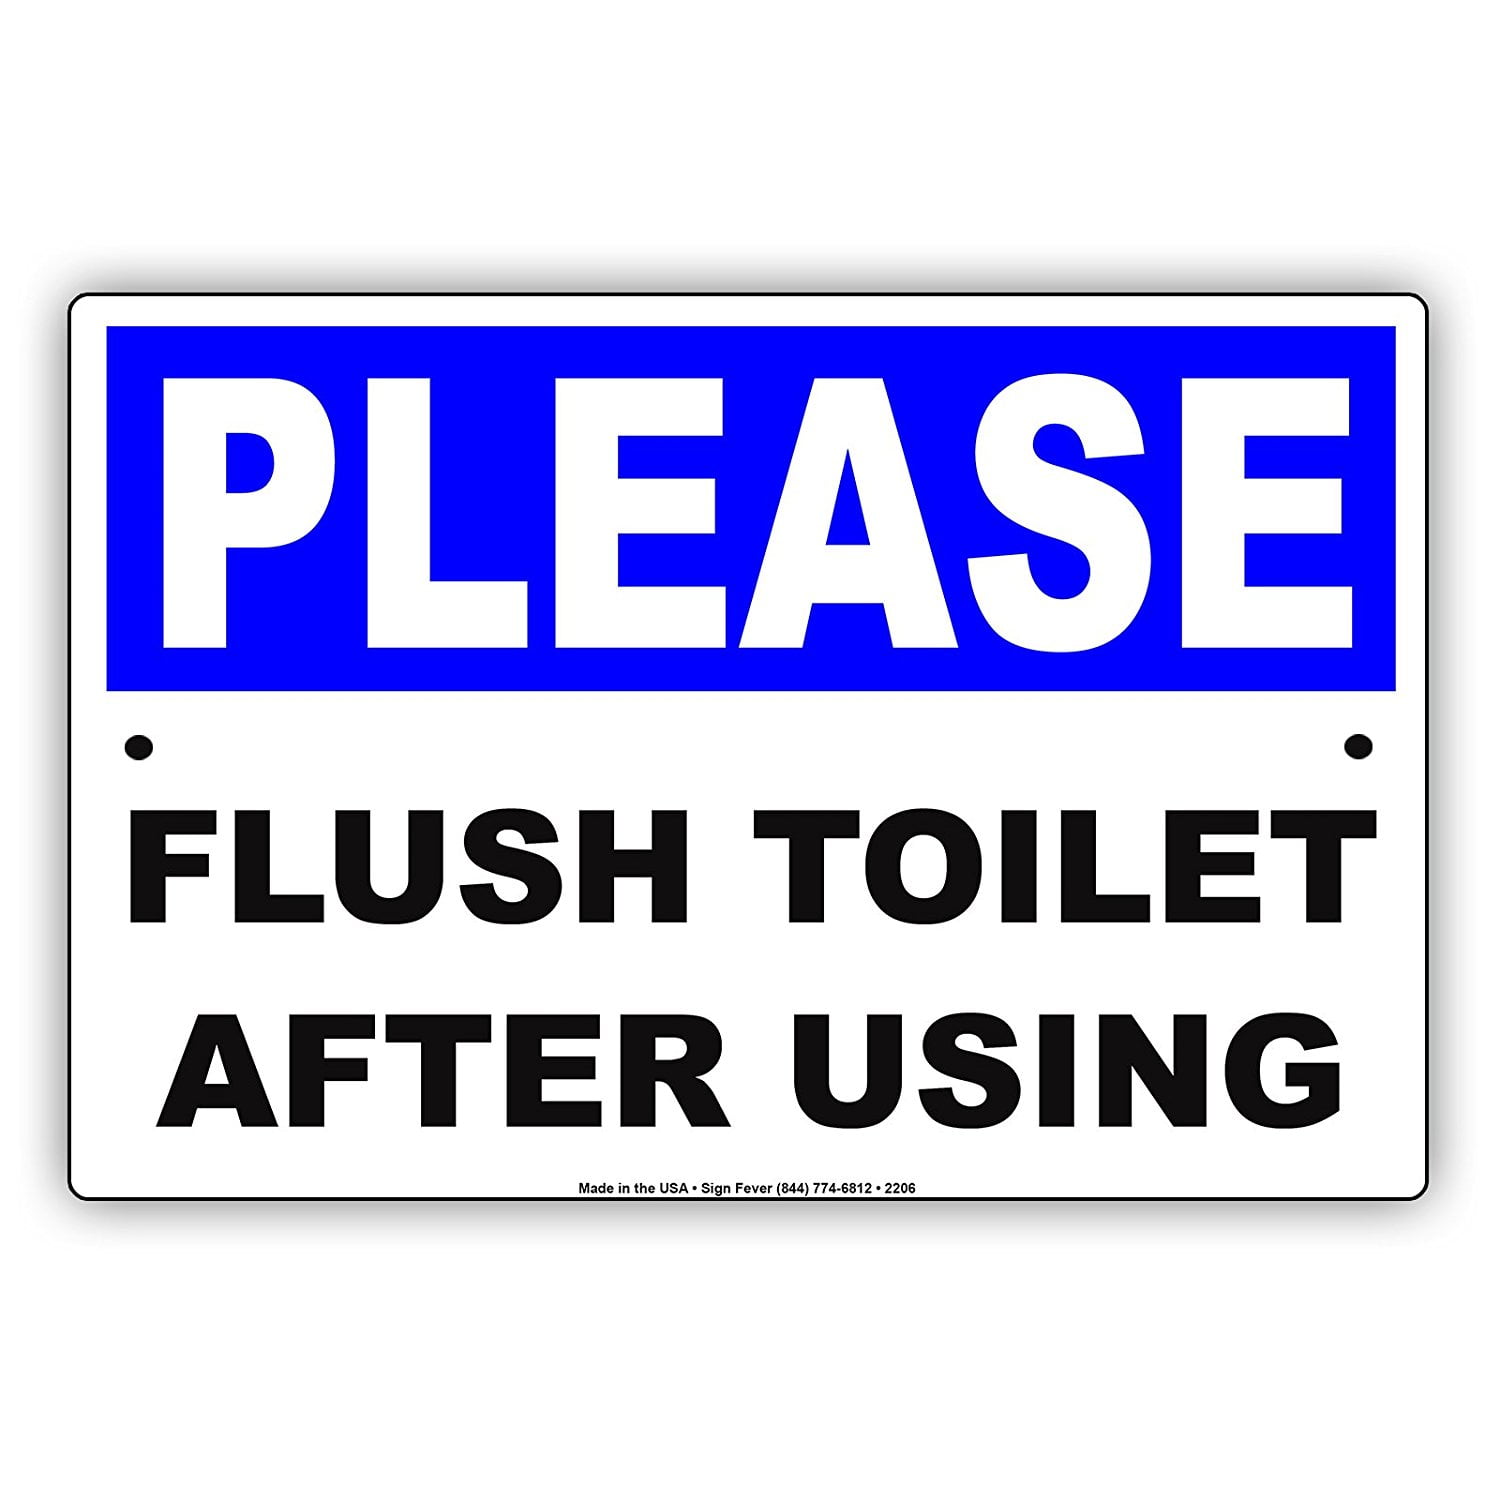 Please Flush Toilet After Using Courtesy Cleanliness Maintenance Alert